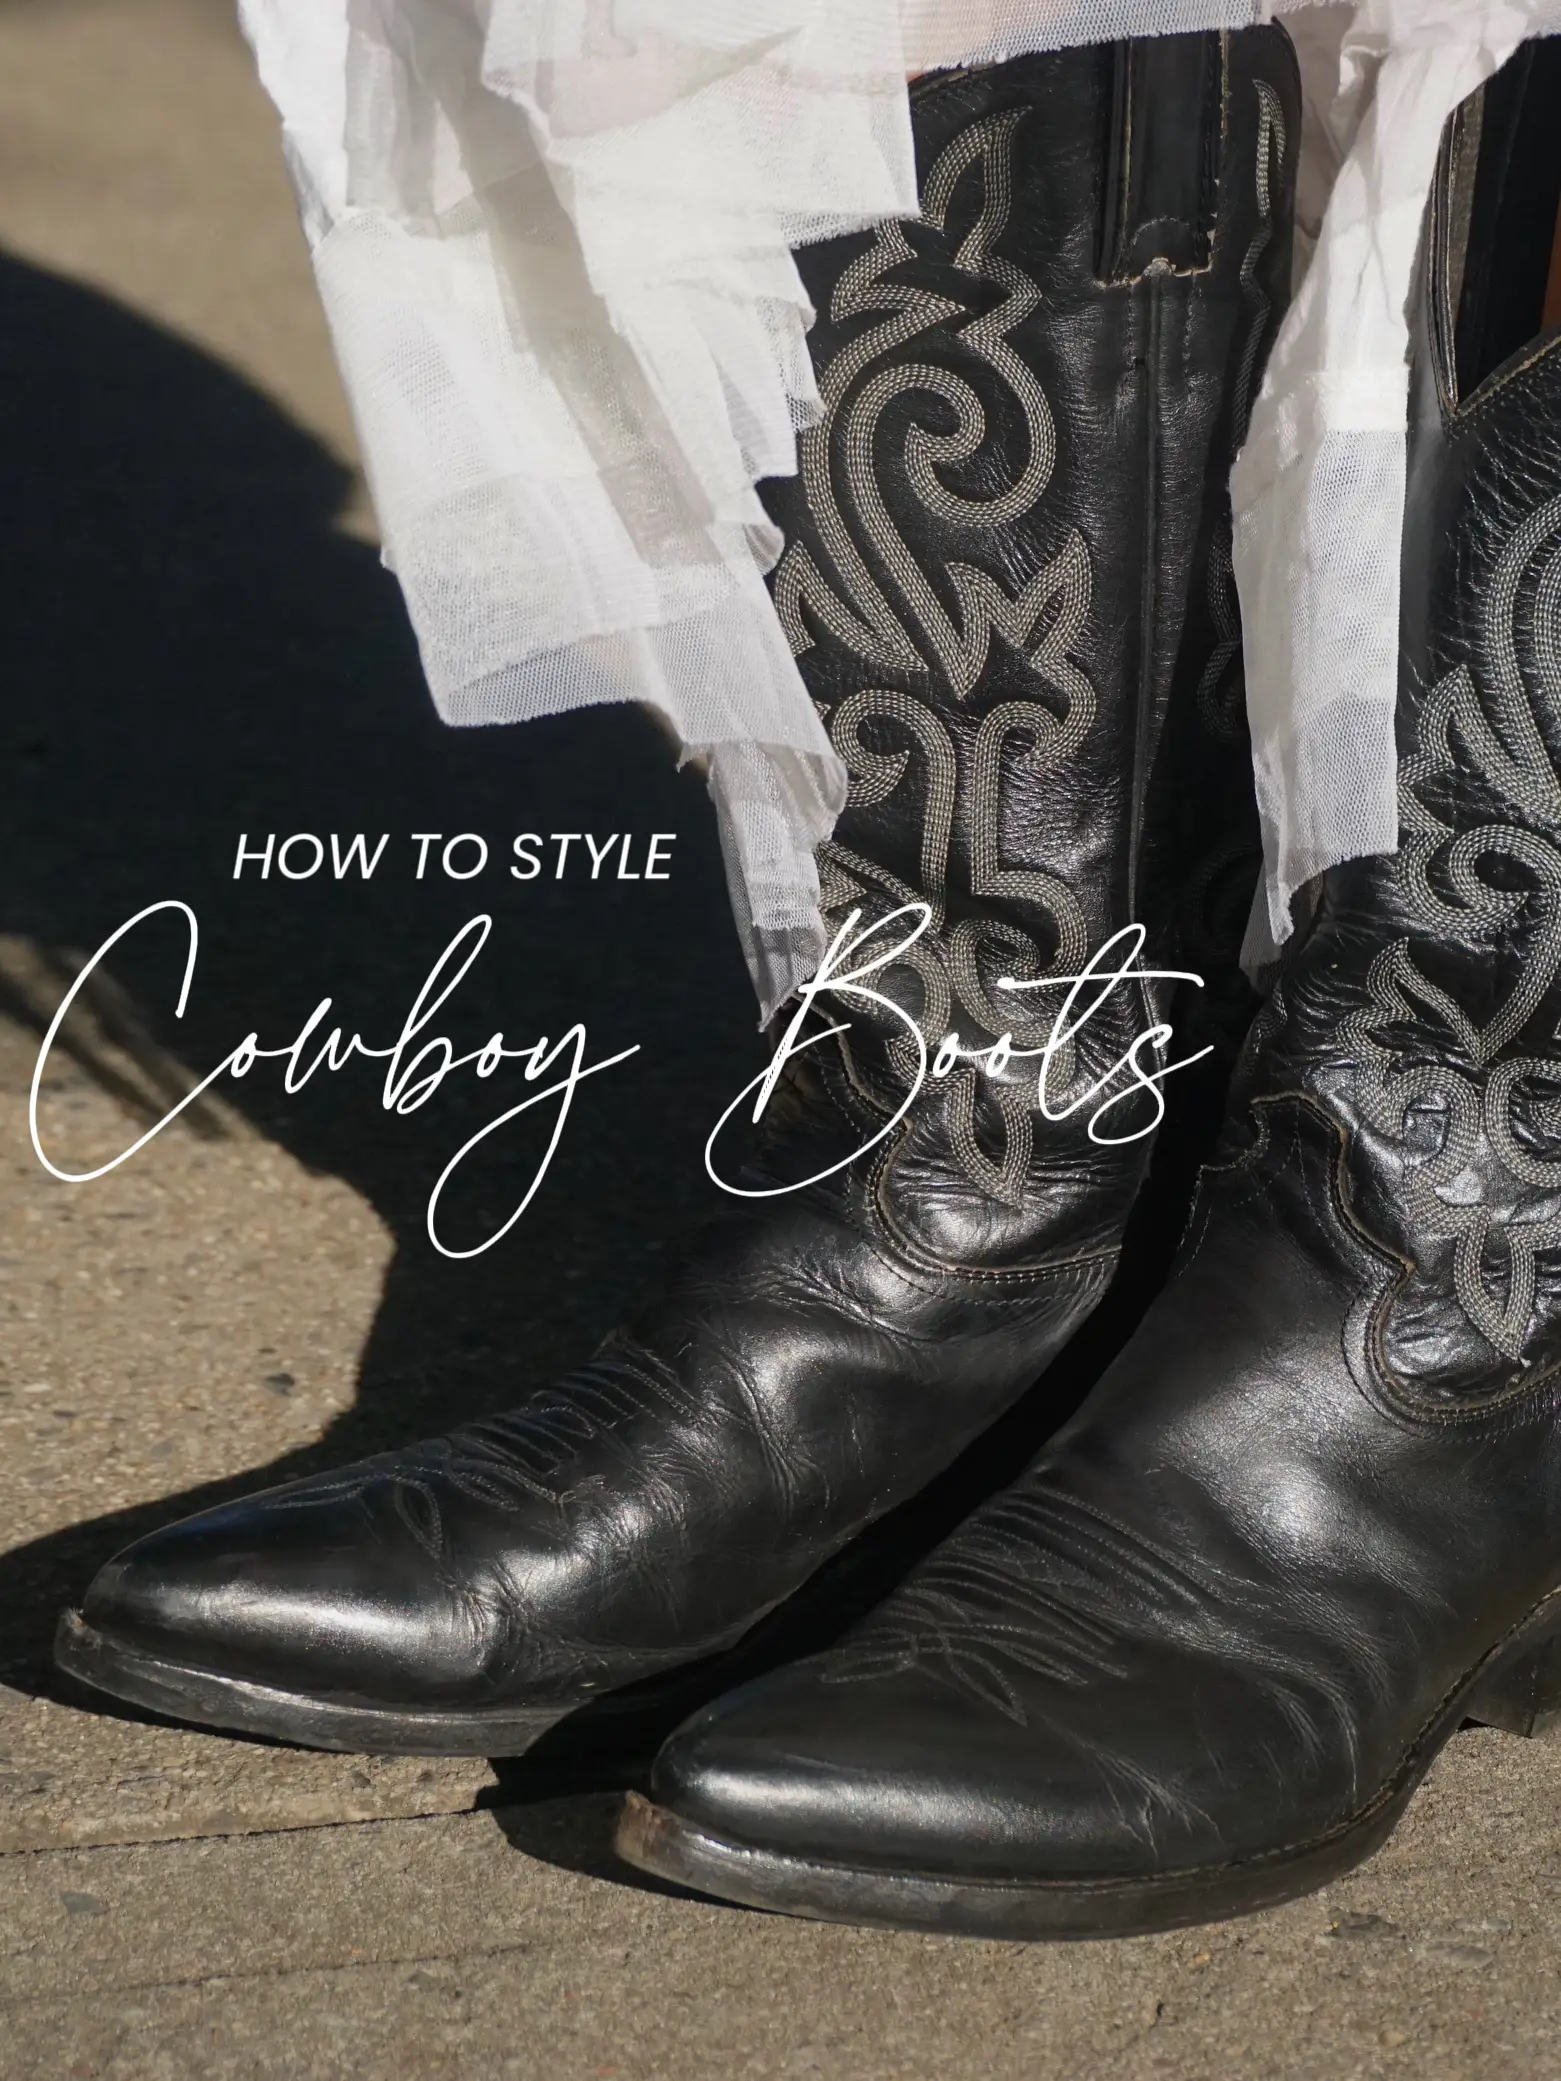 How to style white cowboy boots wearing black pants 👢 Let me know you